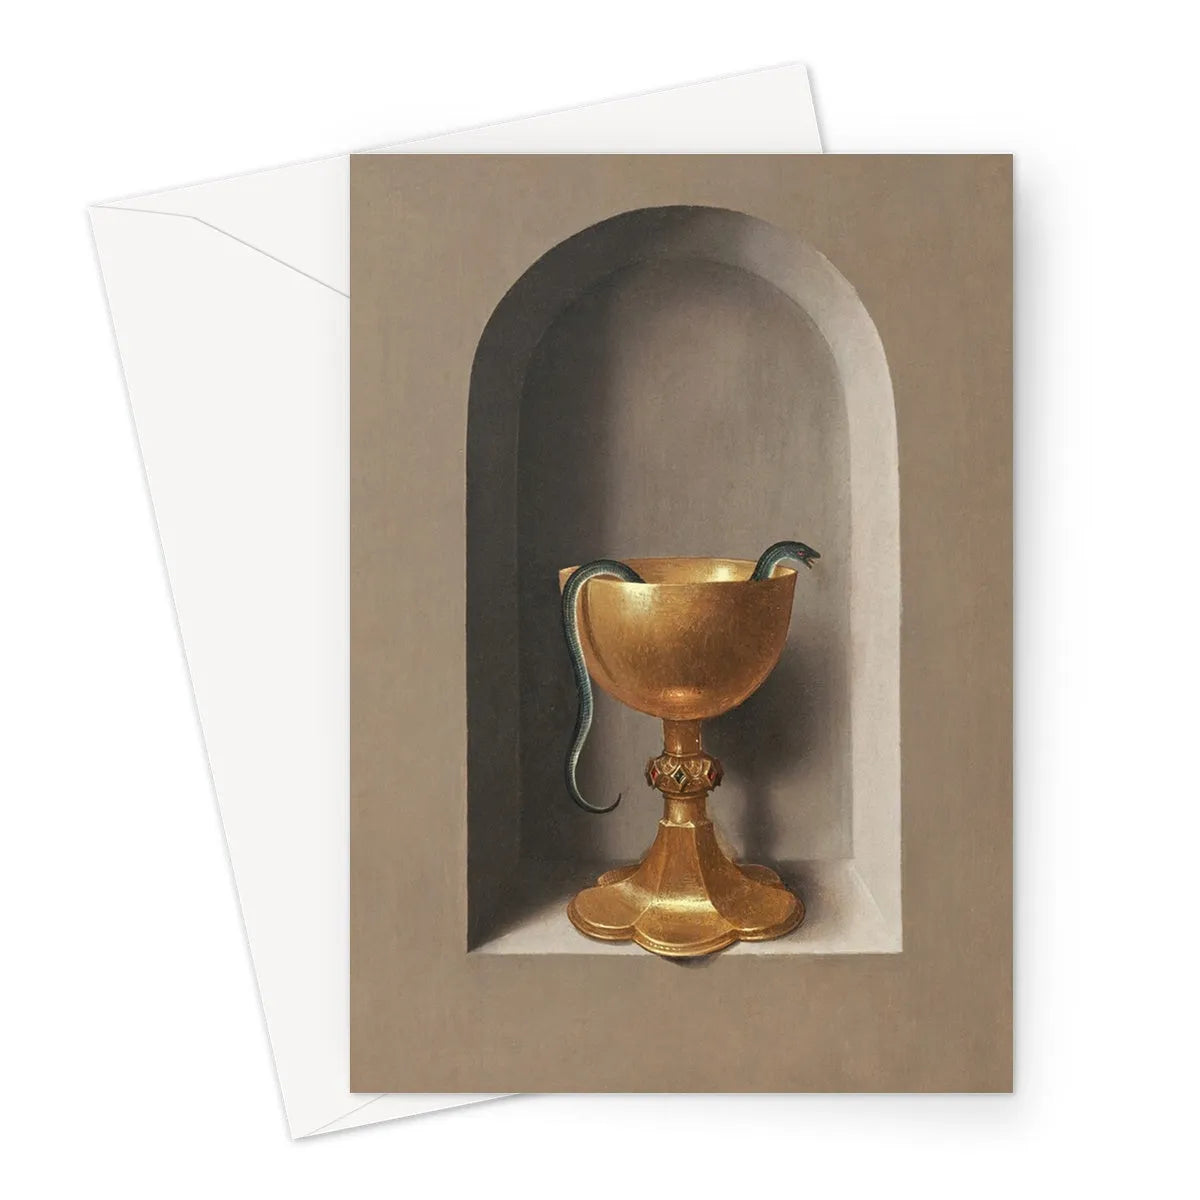 Chalice Of Saint John The Evangelist By Hans Memling Greeting Card - A5 Portrait / 1 Card - Greeting & Note Cards